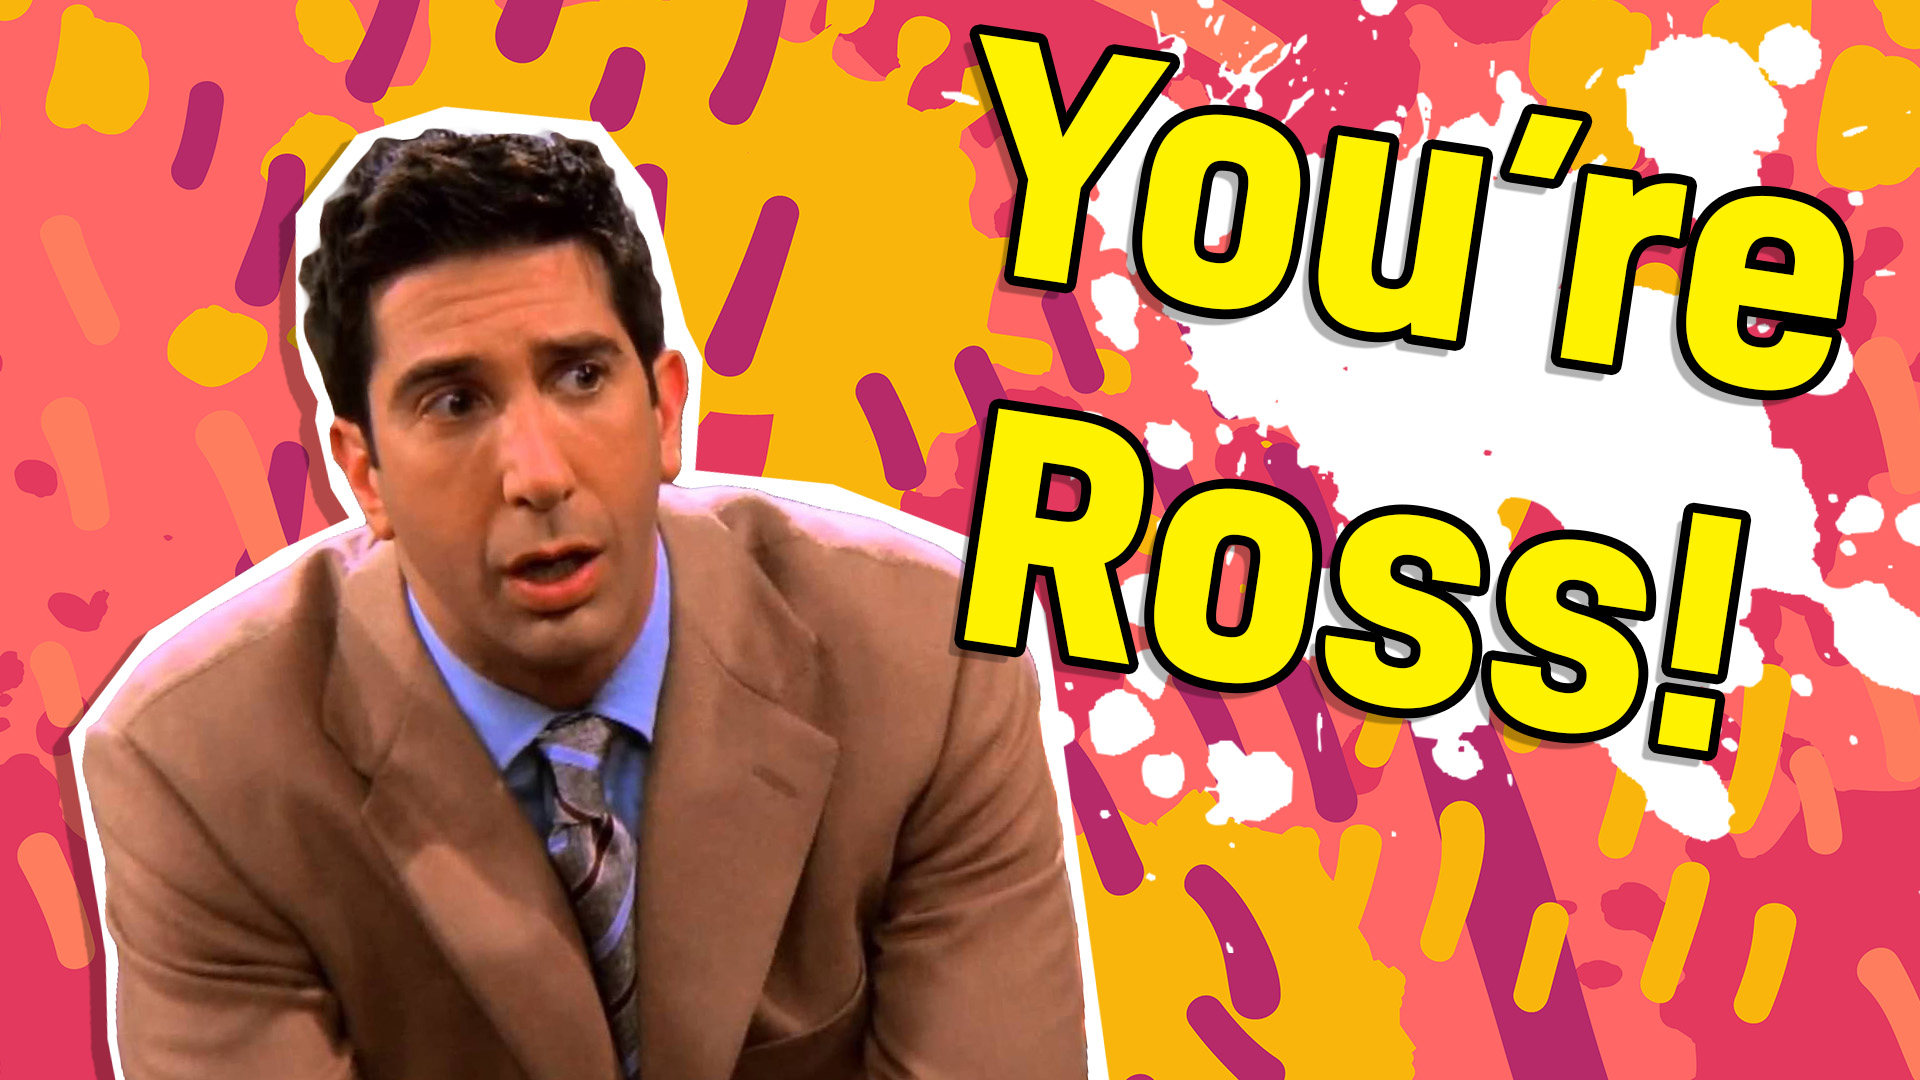 Your favourite is Ross!